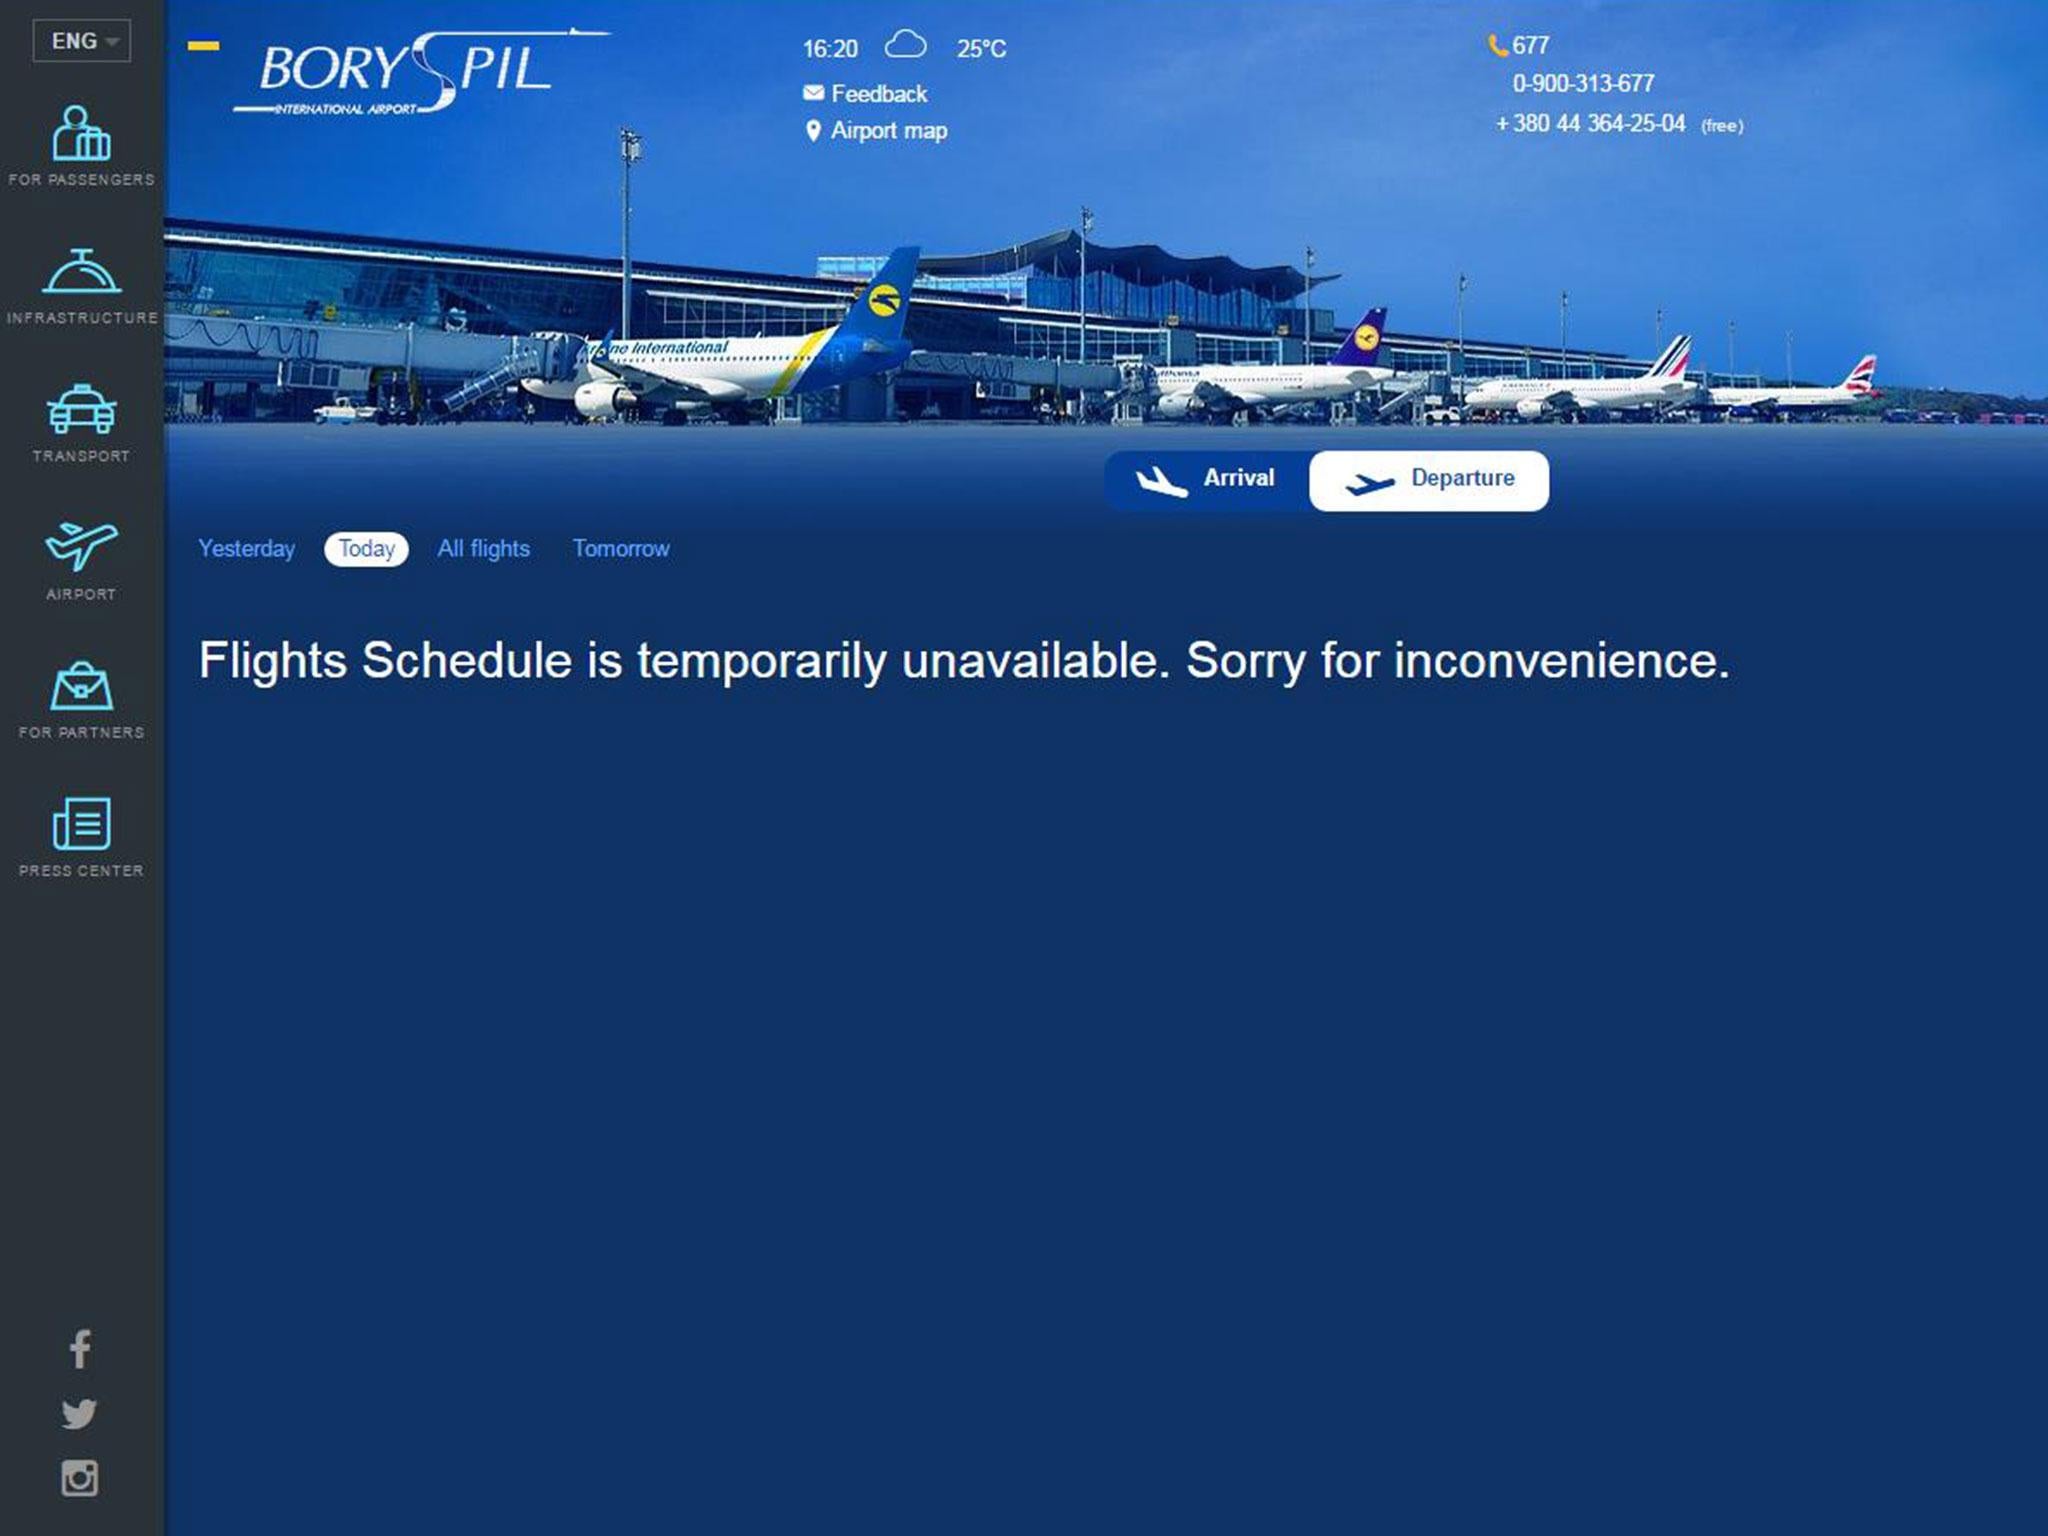 The website of Boryspil International Airport during a cyber attack targeting Ukrainian infrastructure on 27 June 2017